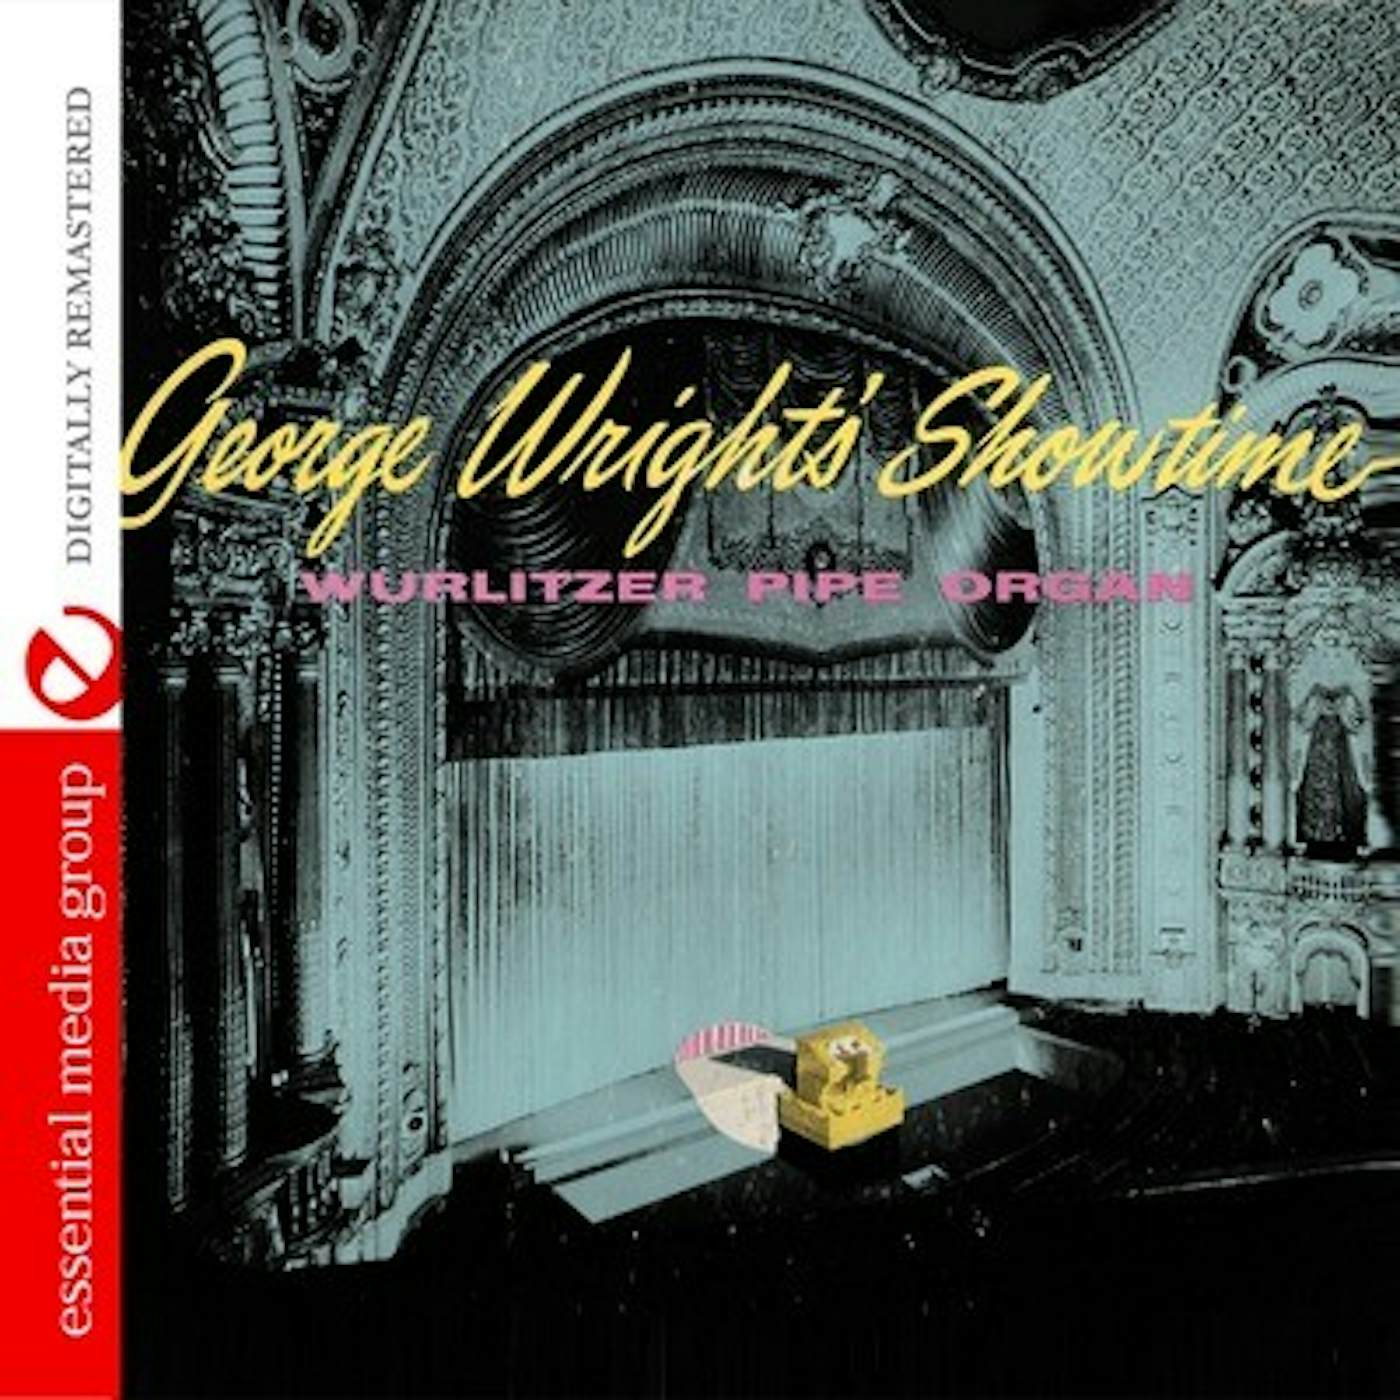 GEORGE WRIGHT'S SHOWTIME CD